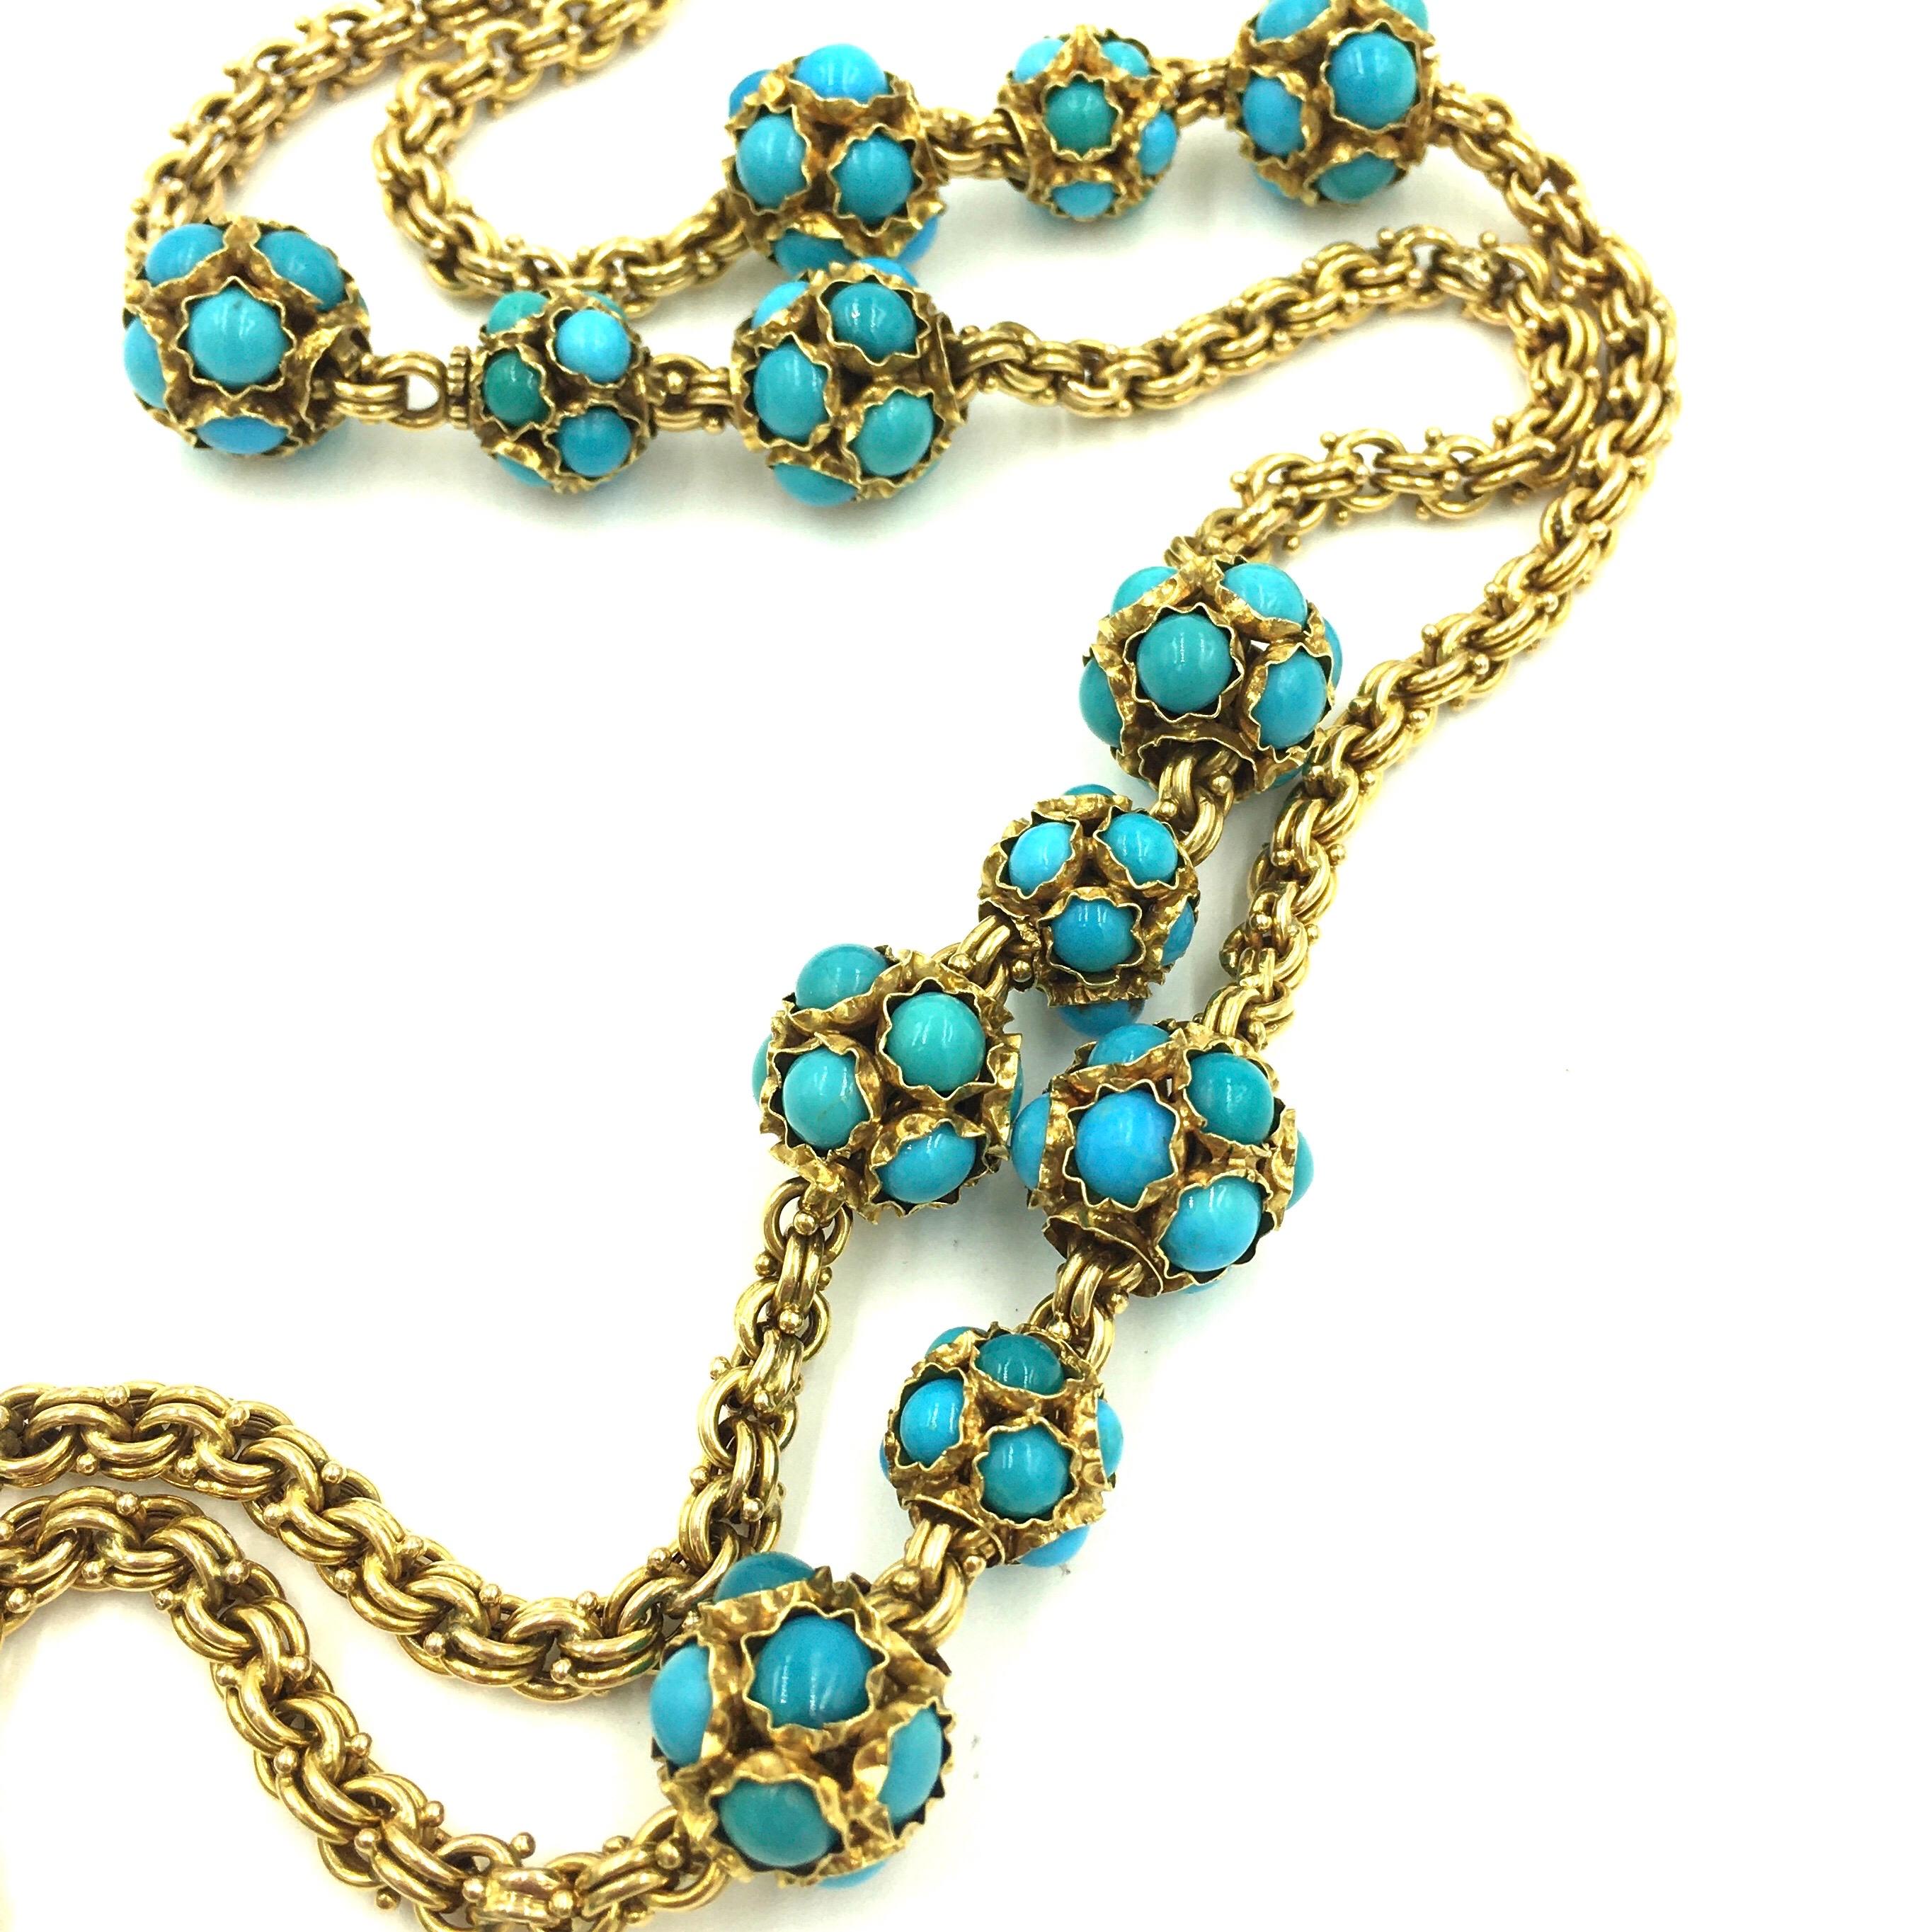 An 18 karat yellow gold and turquoise necklace. Circa 1960. Designed as a fancy link link chain, spaced at intervals by cabochon turquoise set boules. Length is approximately 38 inches, gross weight is approximately 155.8 grams. 